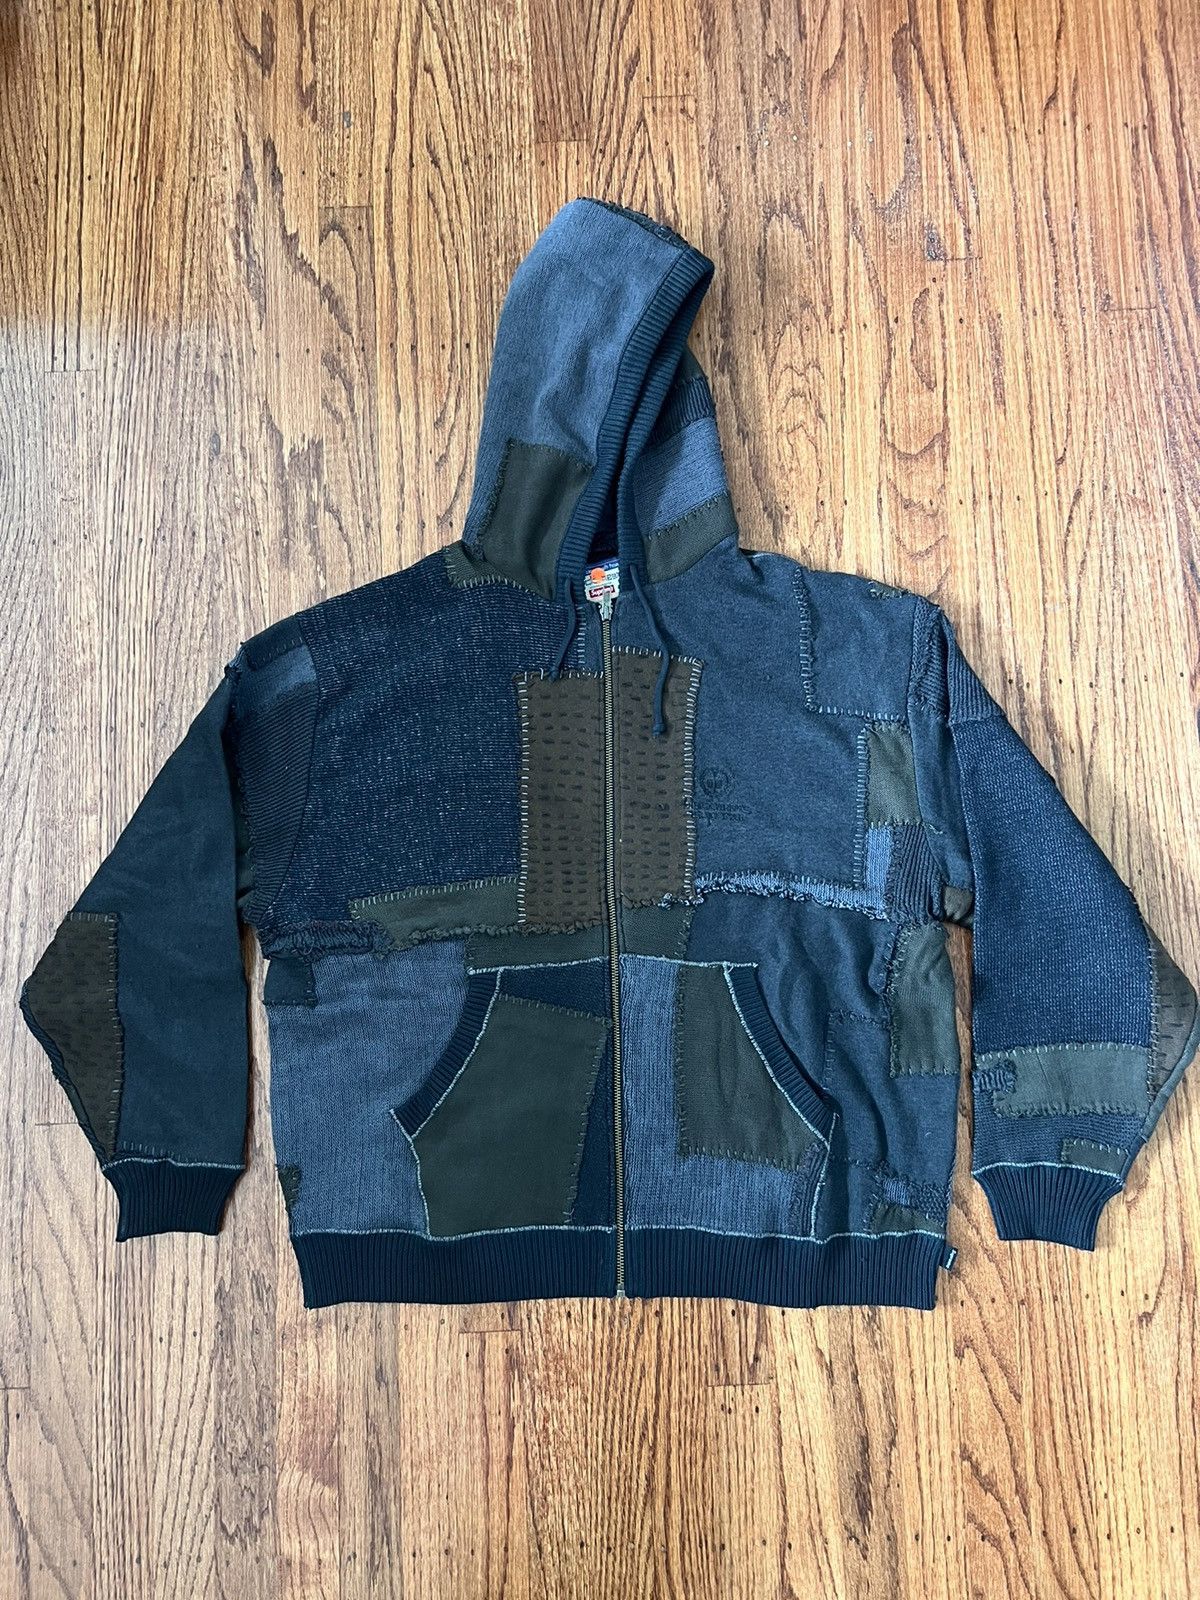 Supreme Supreme x Blackmeans Patchwork Zip Up Hooded Sweater | Grailed